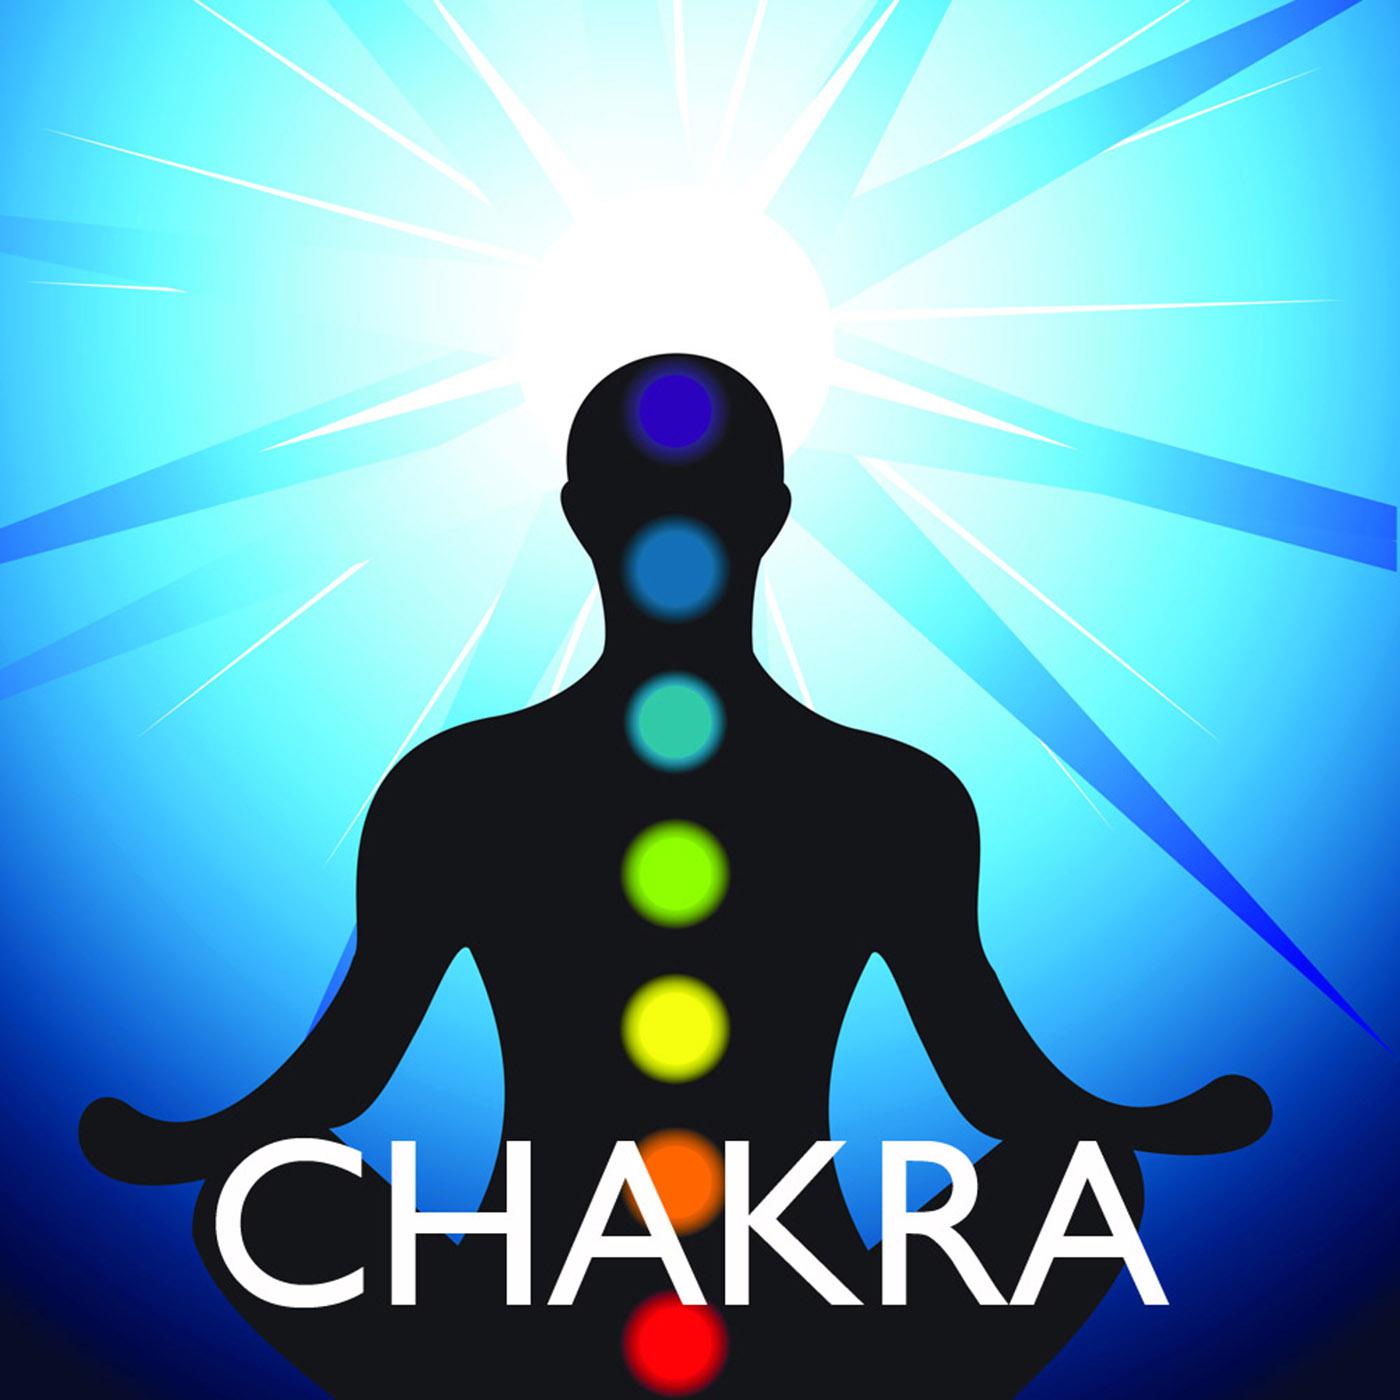 Chakra Balancing: Chakras, Sound Healing Meditation Music Therapy for Relaxation, Restful Sleep, Inner Balance, Stress Relief and Anxiety Disorder